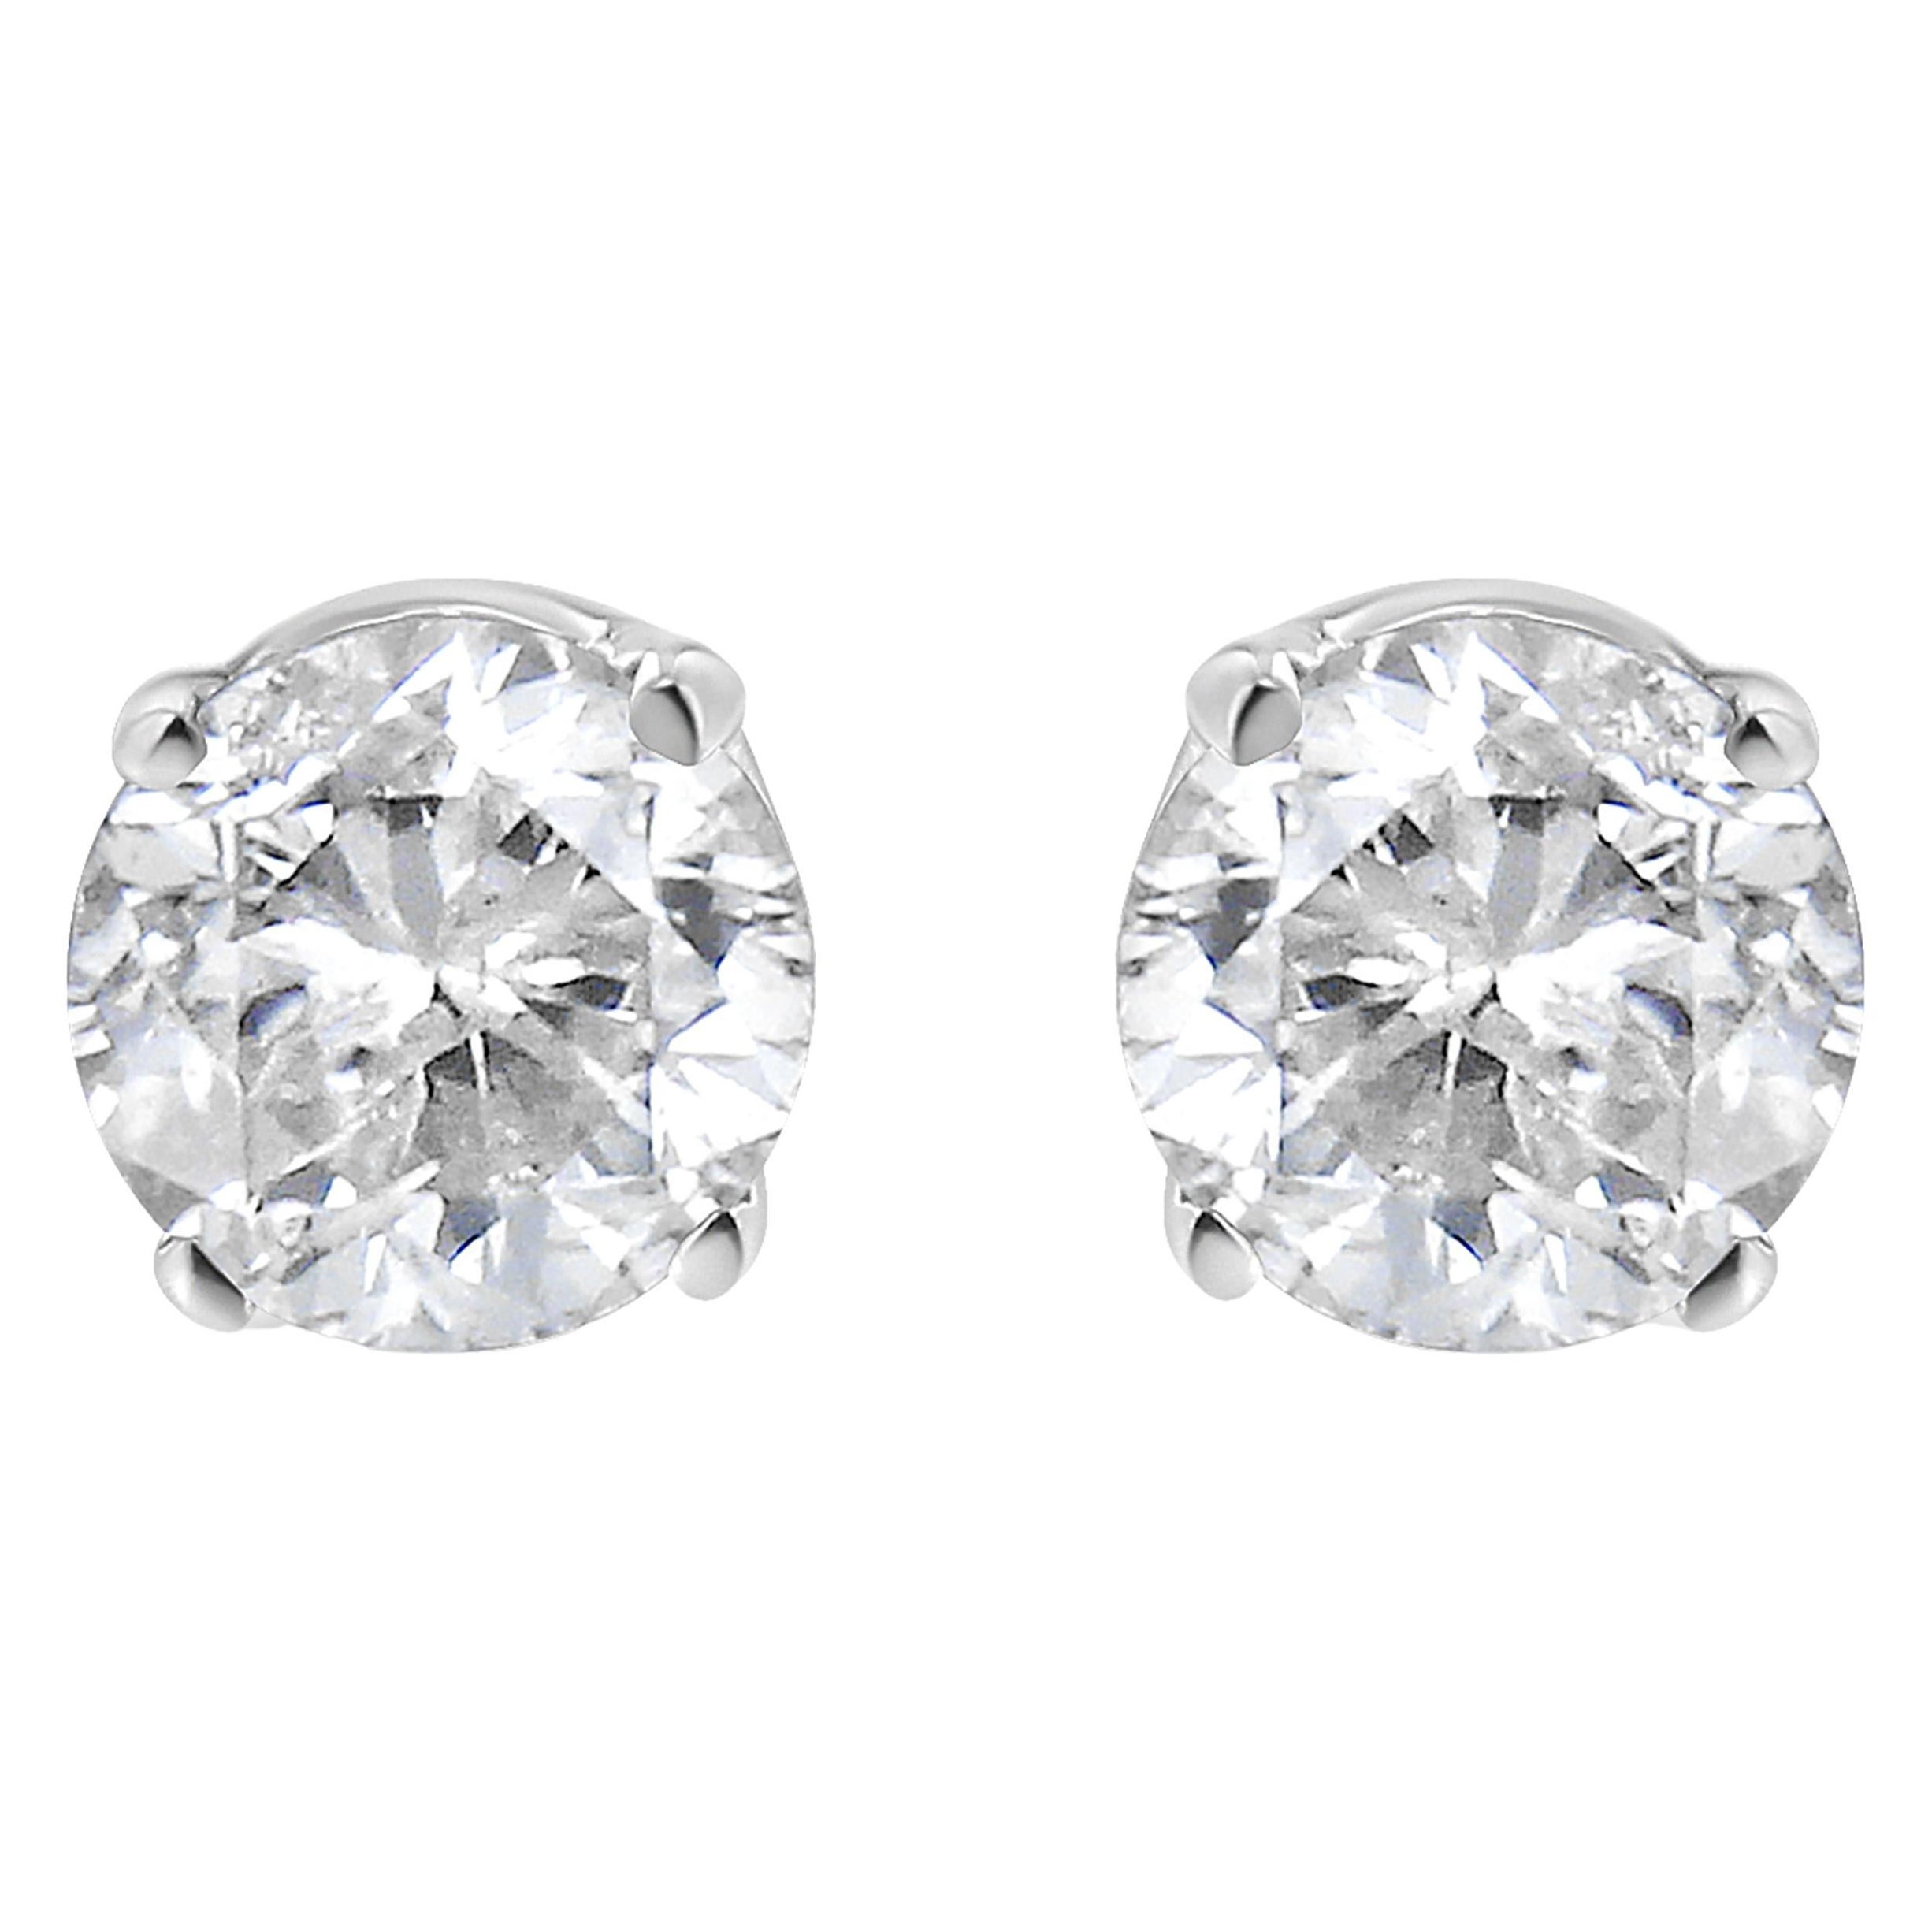 AGS Certified 14K White Gold 1.0 Carat Round-Cut Solitaire Diamond Stud Earrings